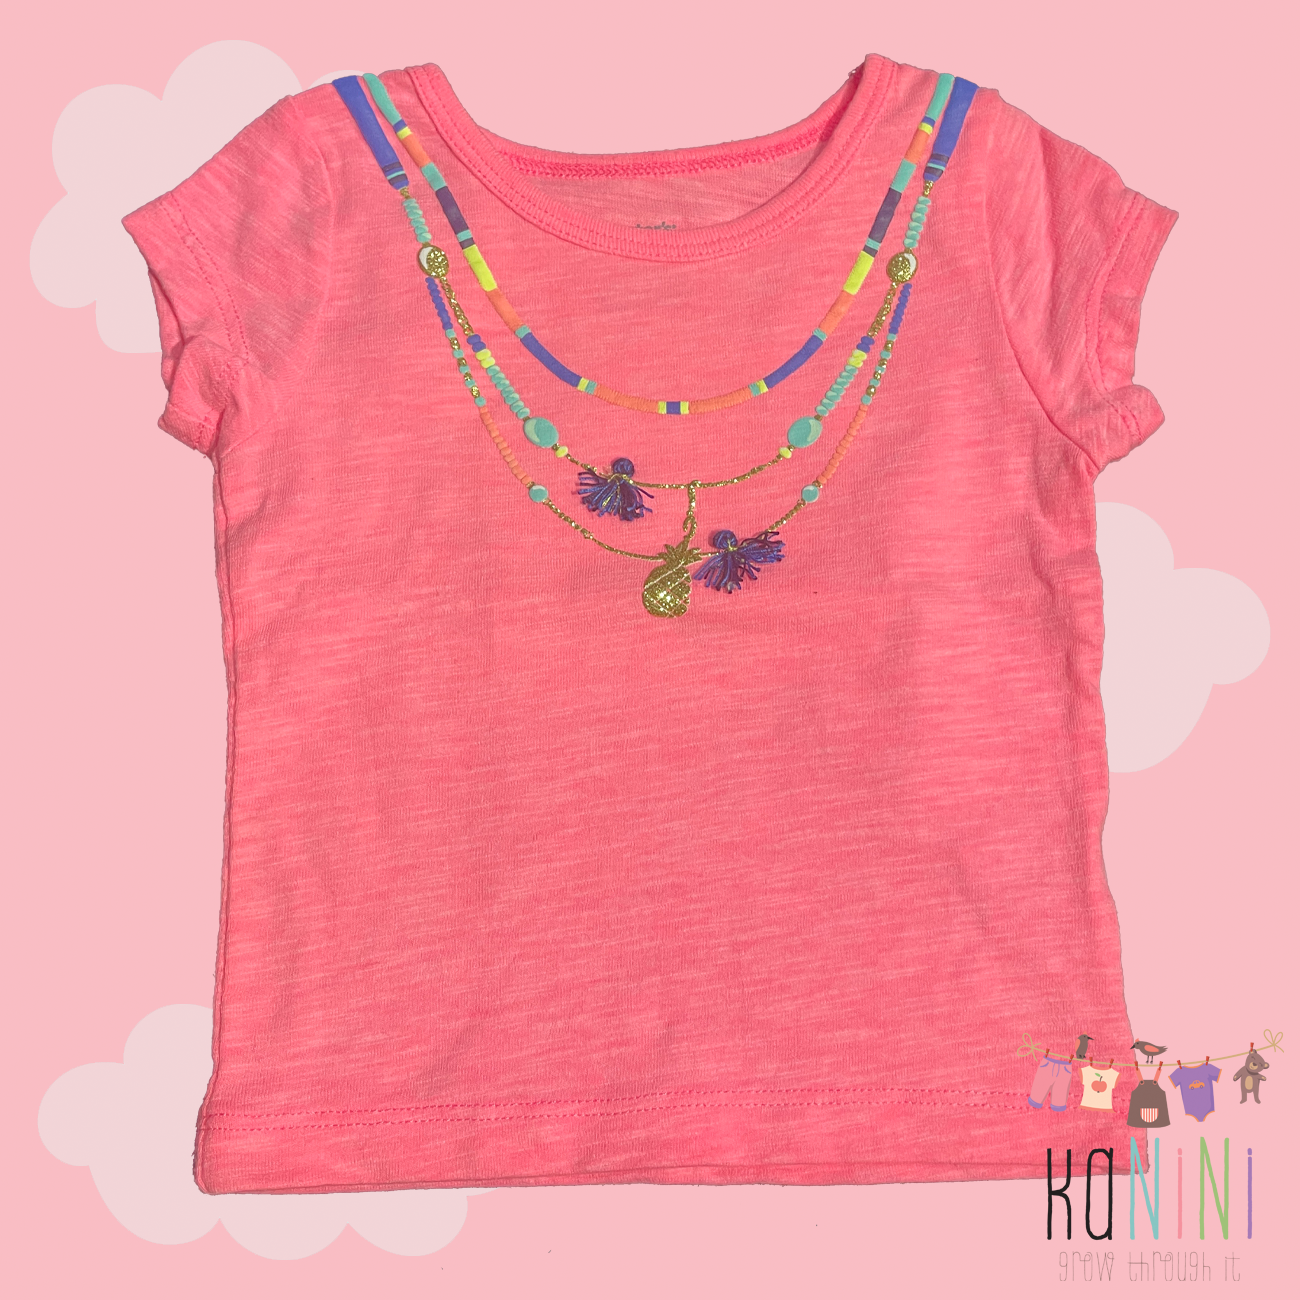 Featured image for “Carter's 9 Months Girls Necklace T-Shirt”